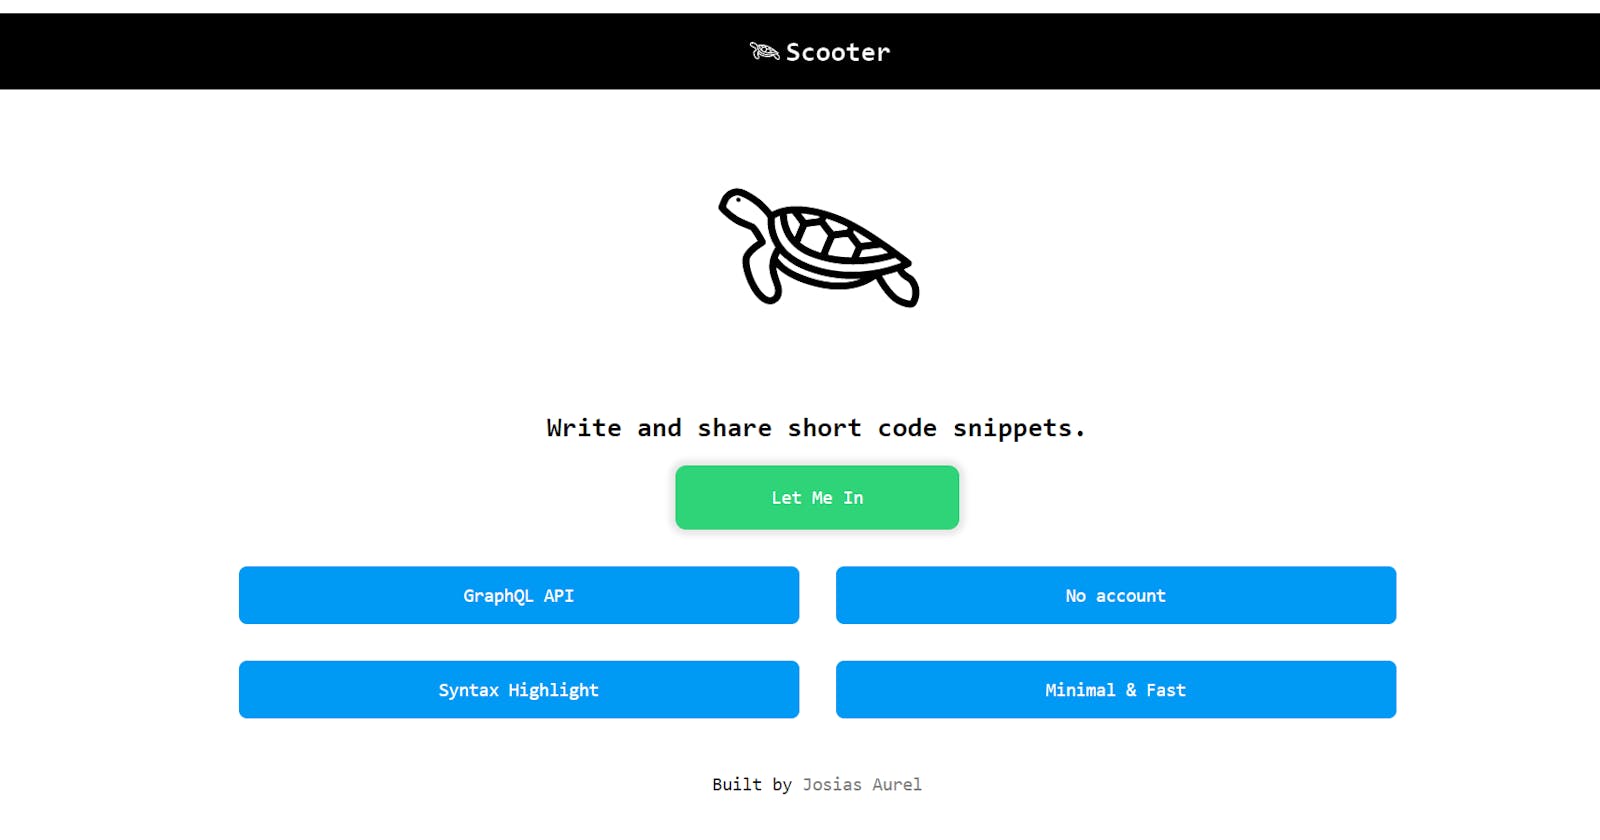 Scooter: Write and publish short code snippets